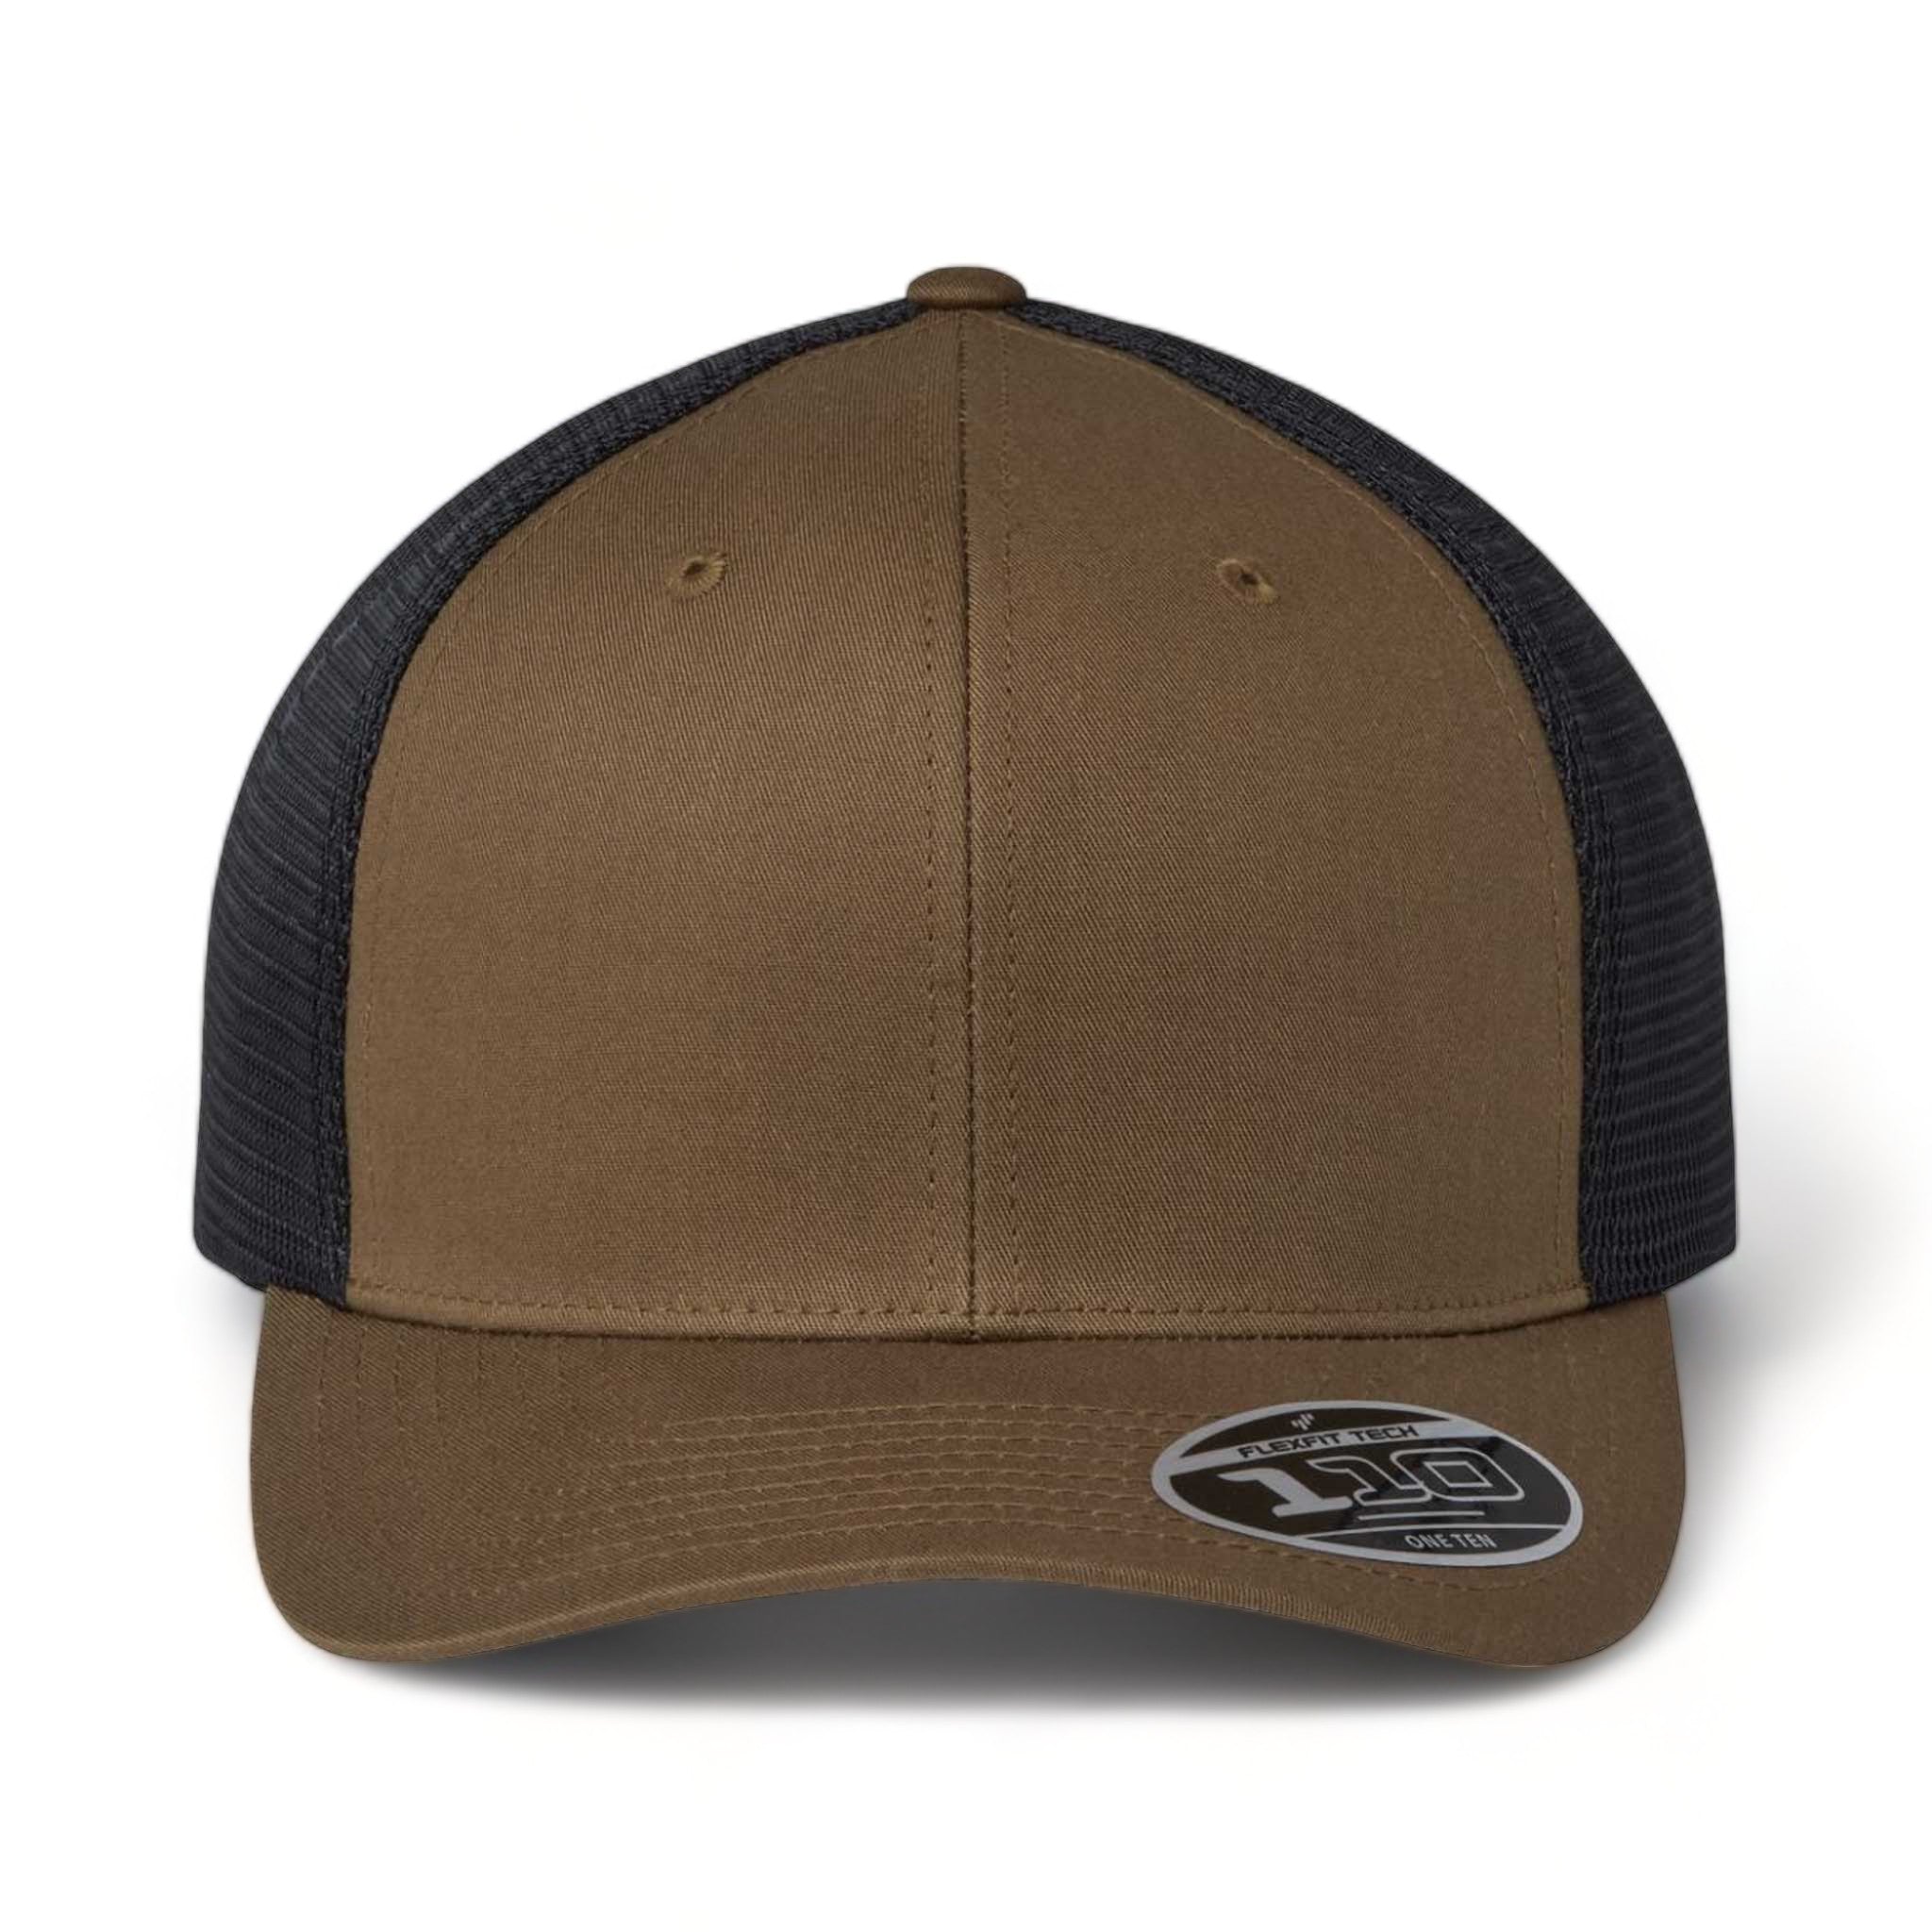 Front view of Flexfit 110M custom hat in coyote brown and black